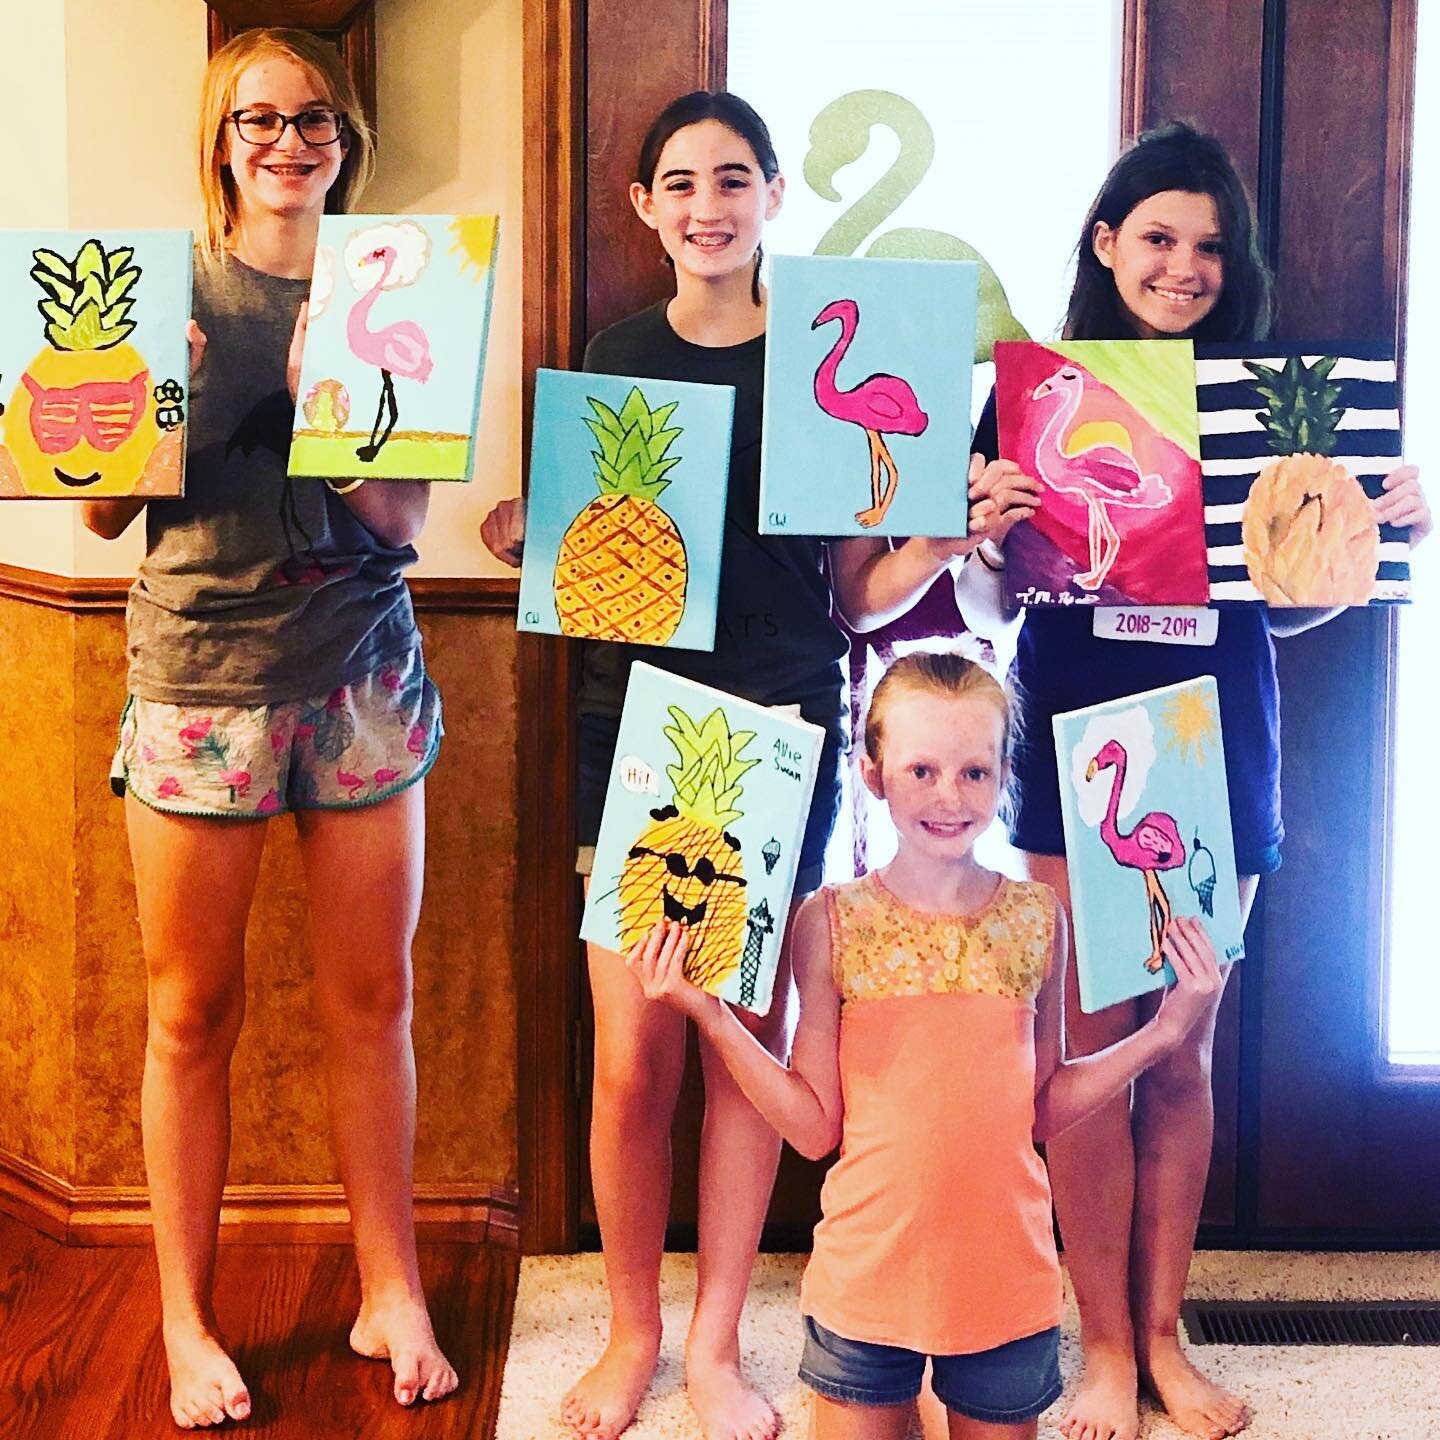 “Great party for my daughter’s birthday. Amanda made everything as stress free as possible. The girls had fun and Amanda encouraged each of them to be creative &amp; unique”